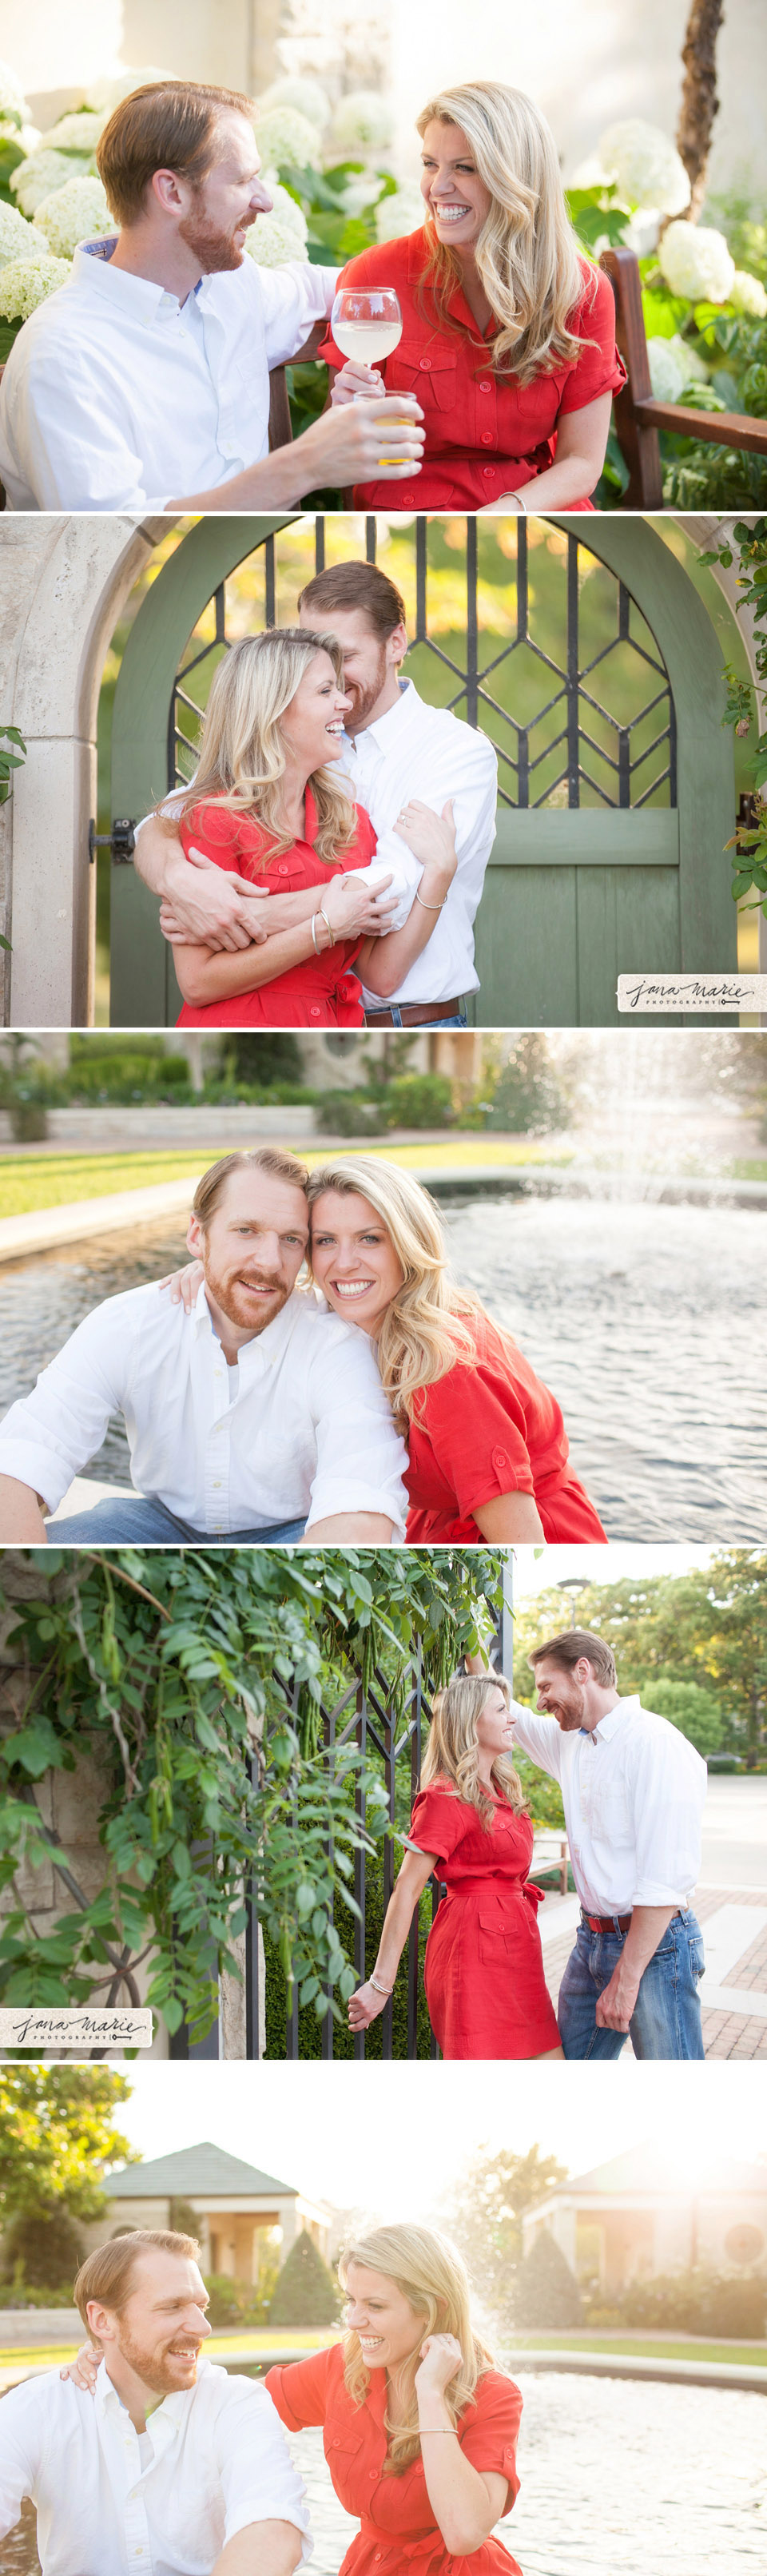 KC portraits, Wedding photography, modern images, outdoors, fountains, Jana Marie Photography